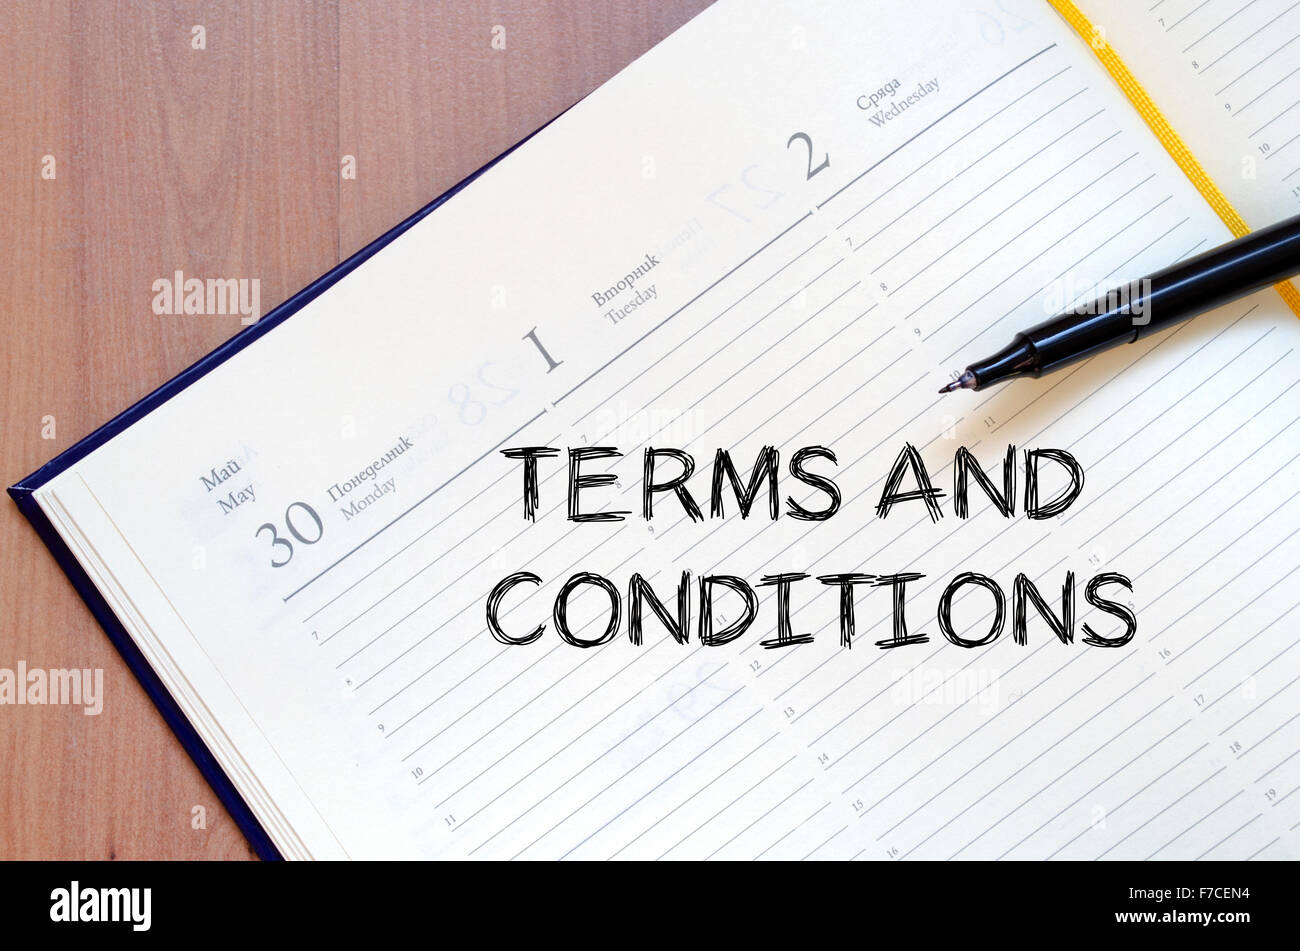 Terms and conditions text concept write on notebook with pen Stock